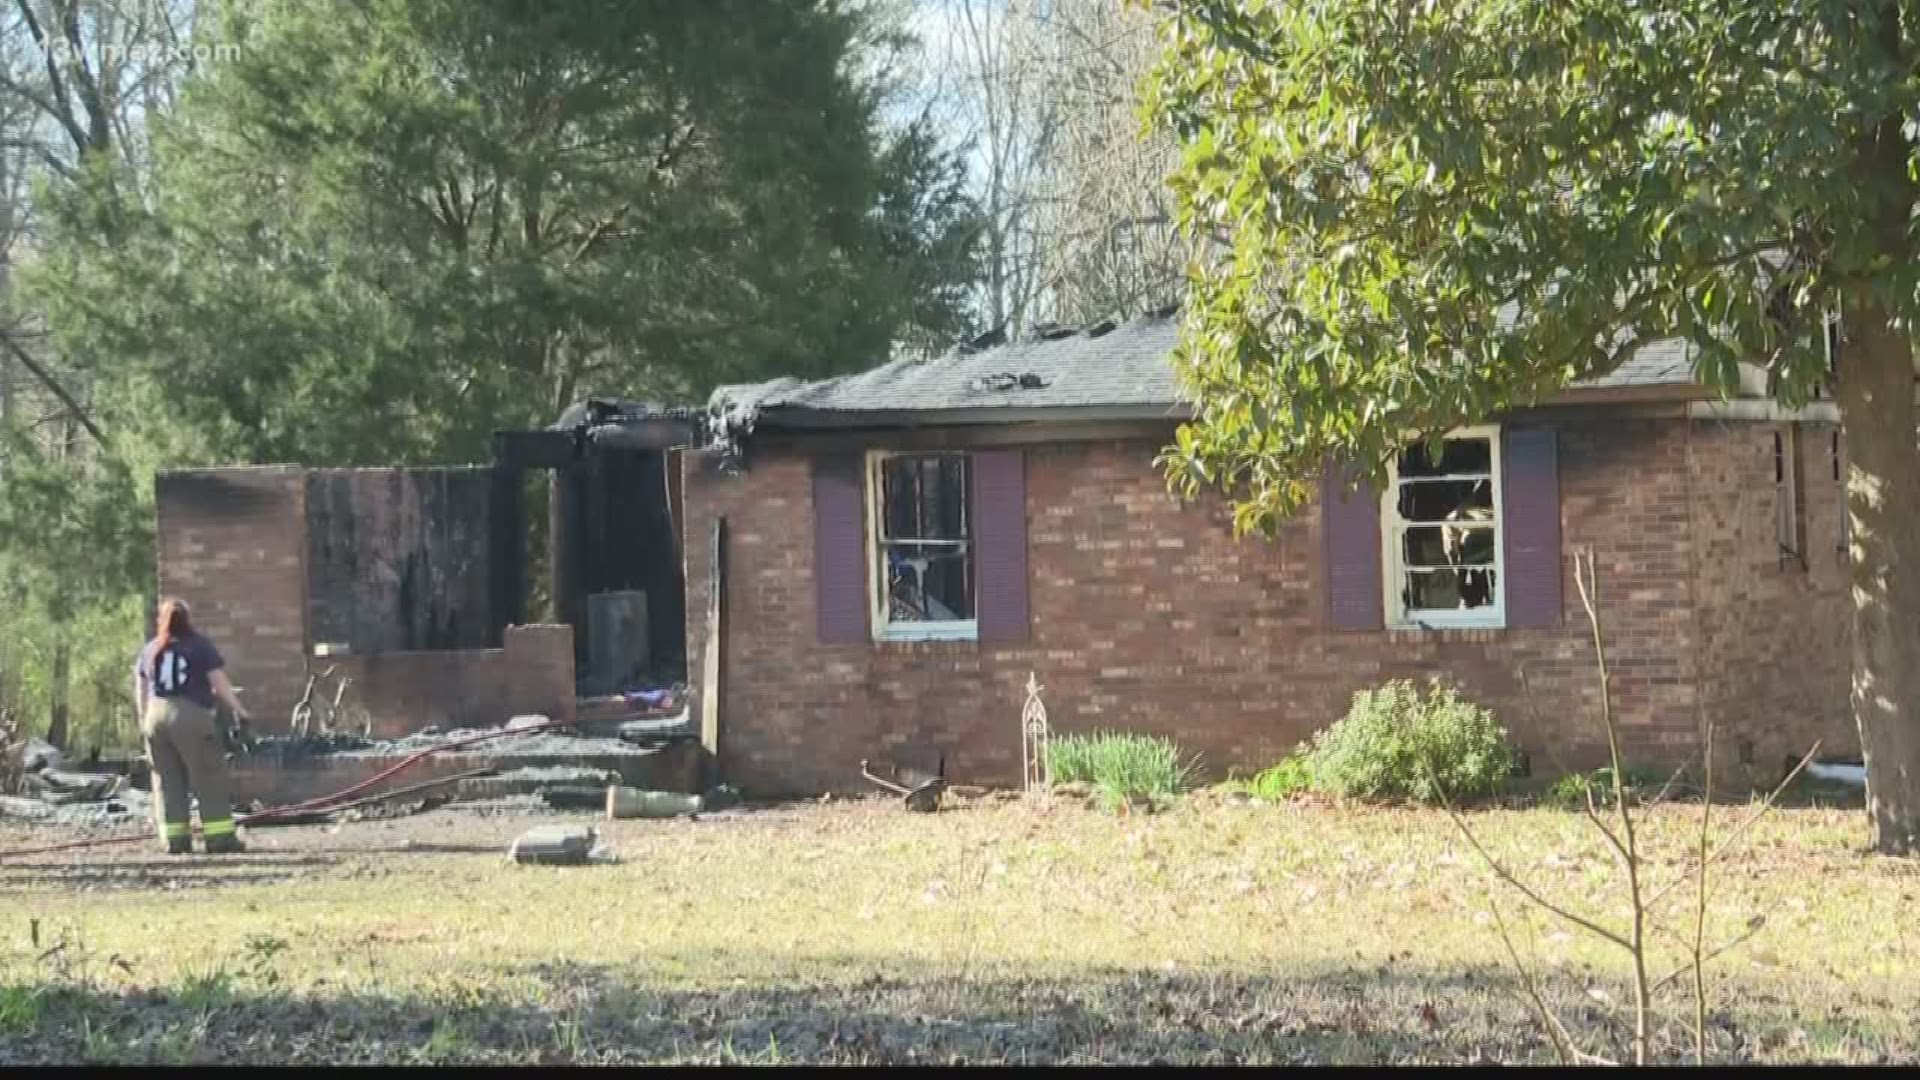 The fire broke out at a home on Old Zebulon Road early Thursday morning. A young woman and man were found dead inside.